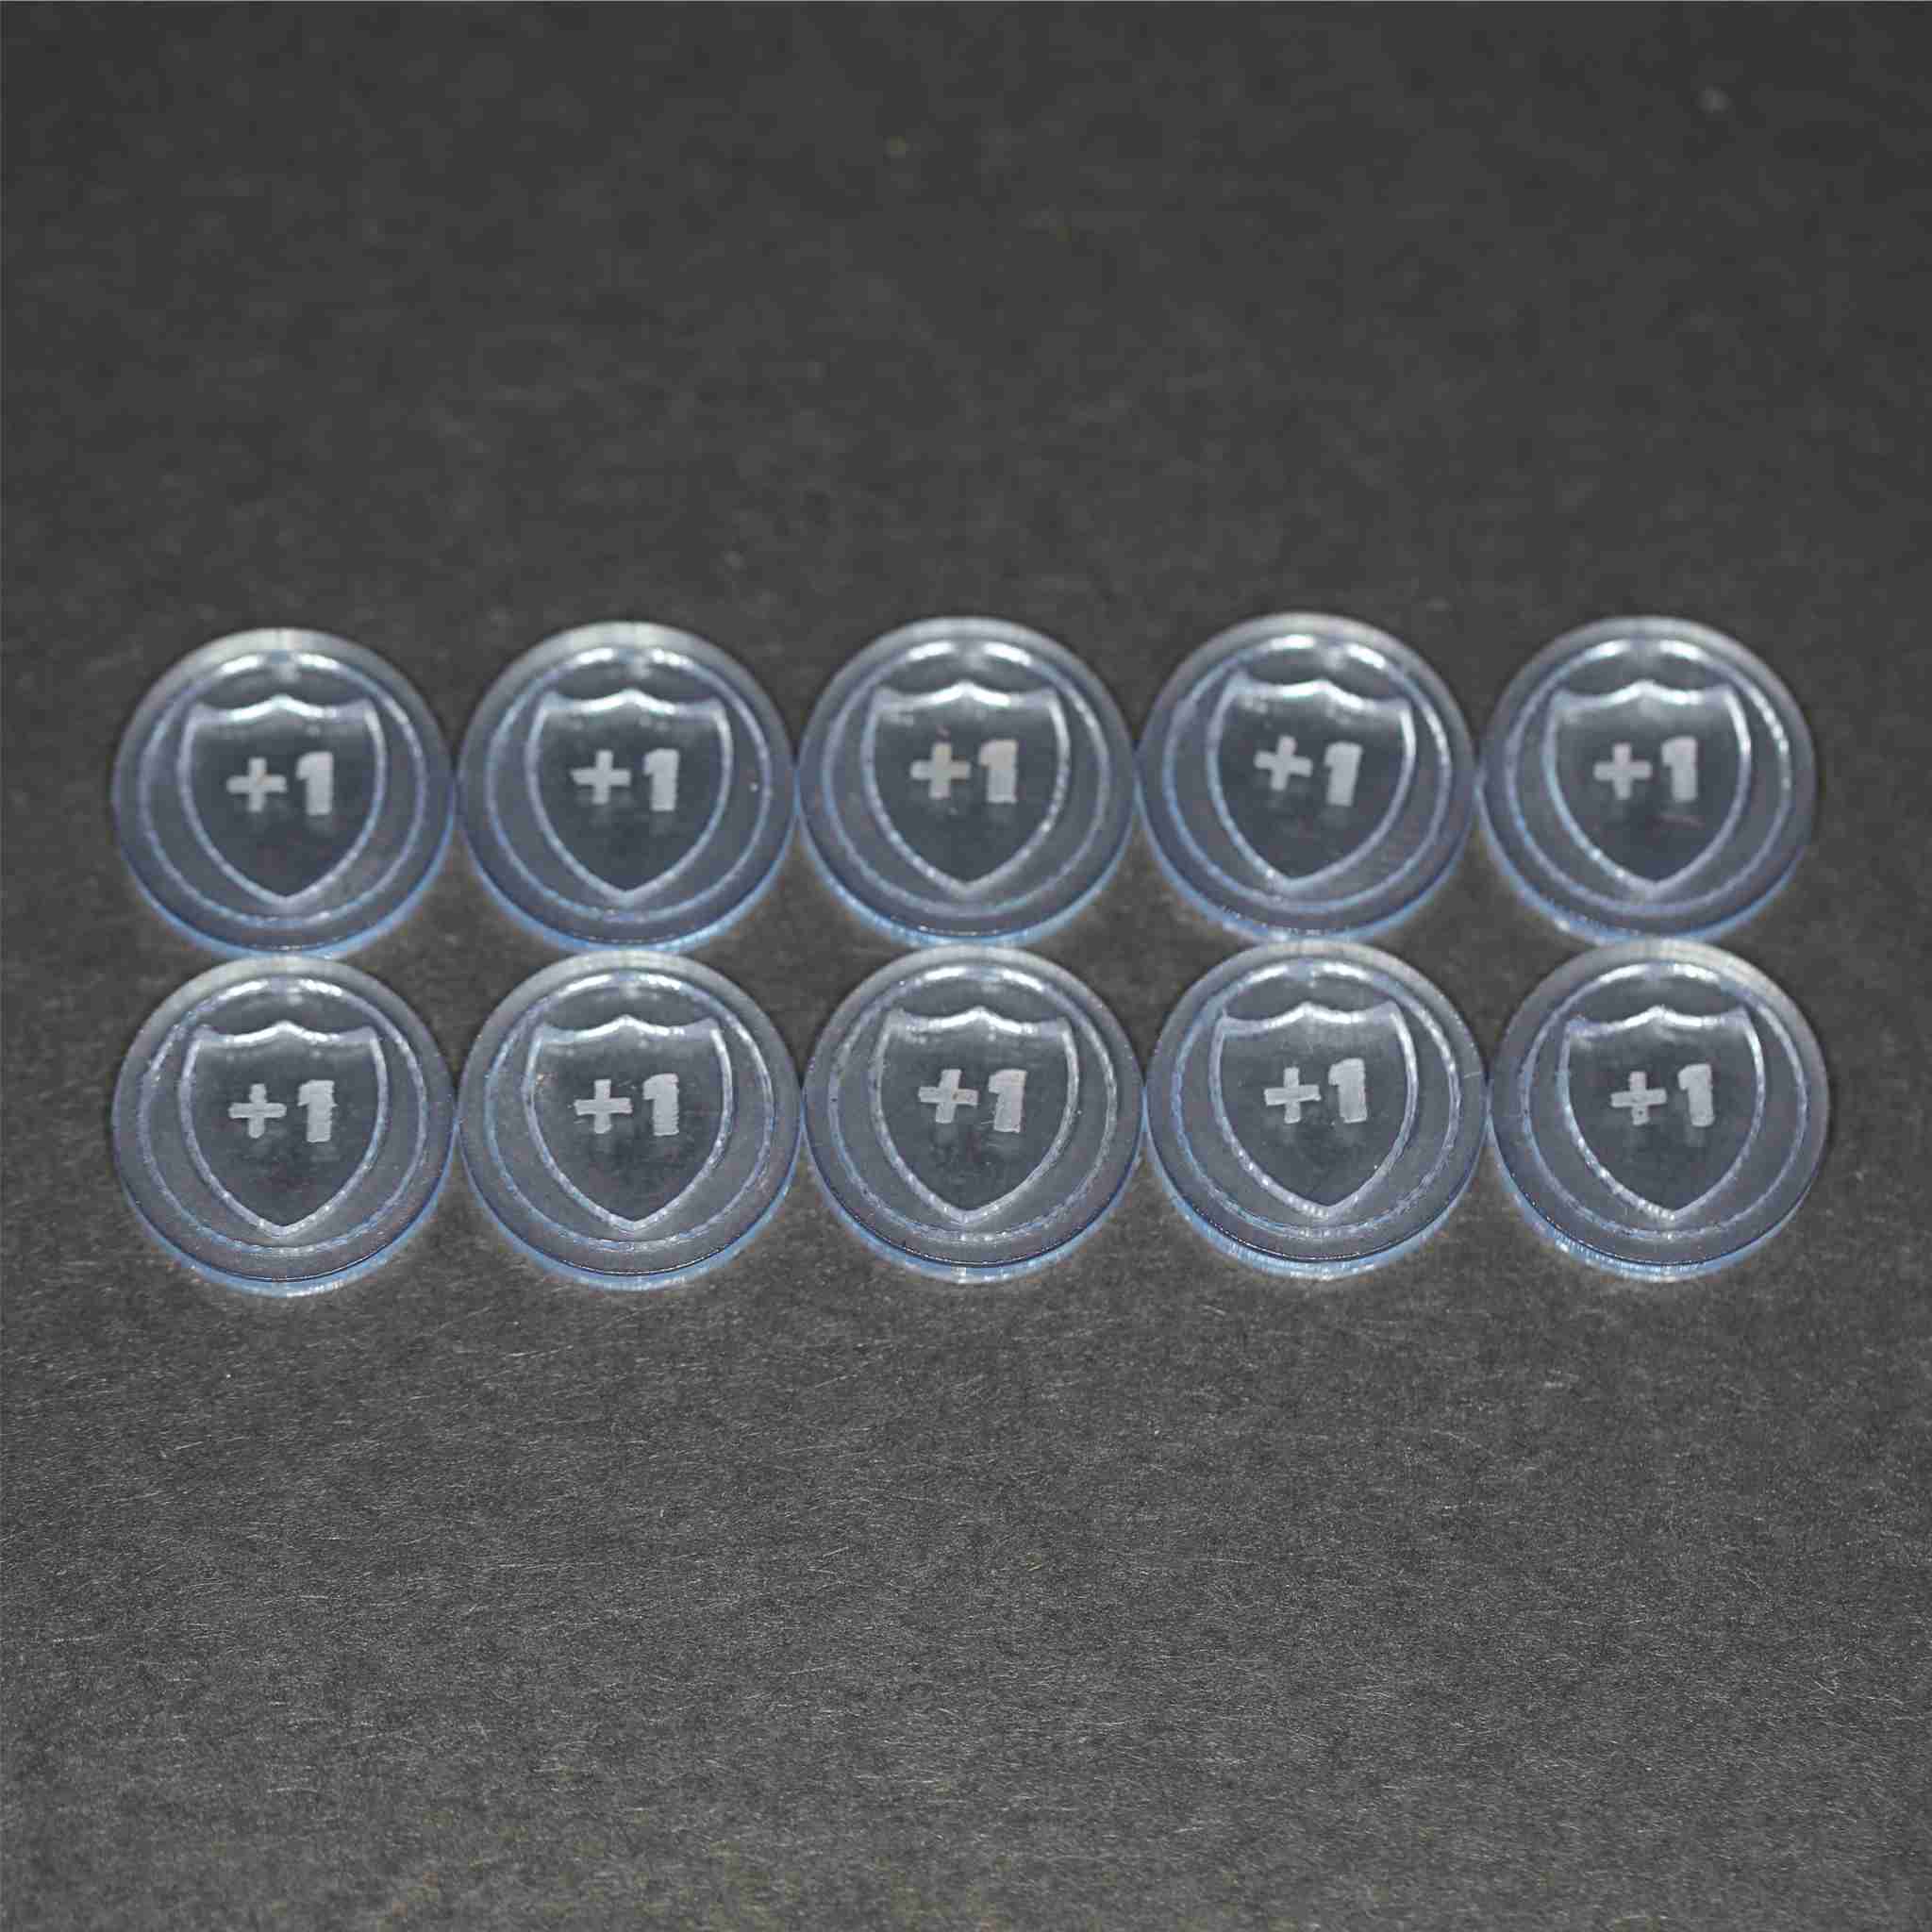 Keyforge compatible +1 Shield Tokens (Qty 10)